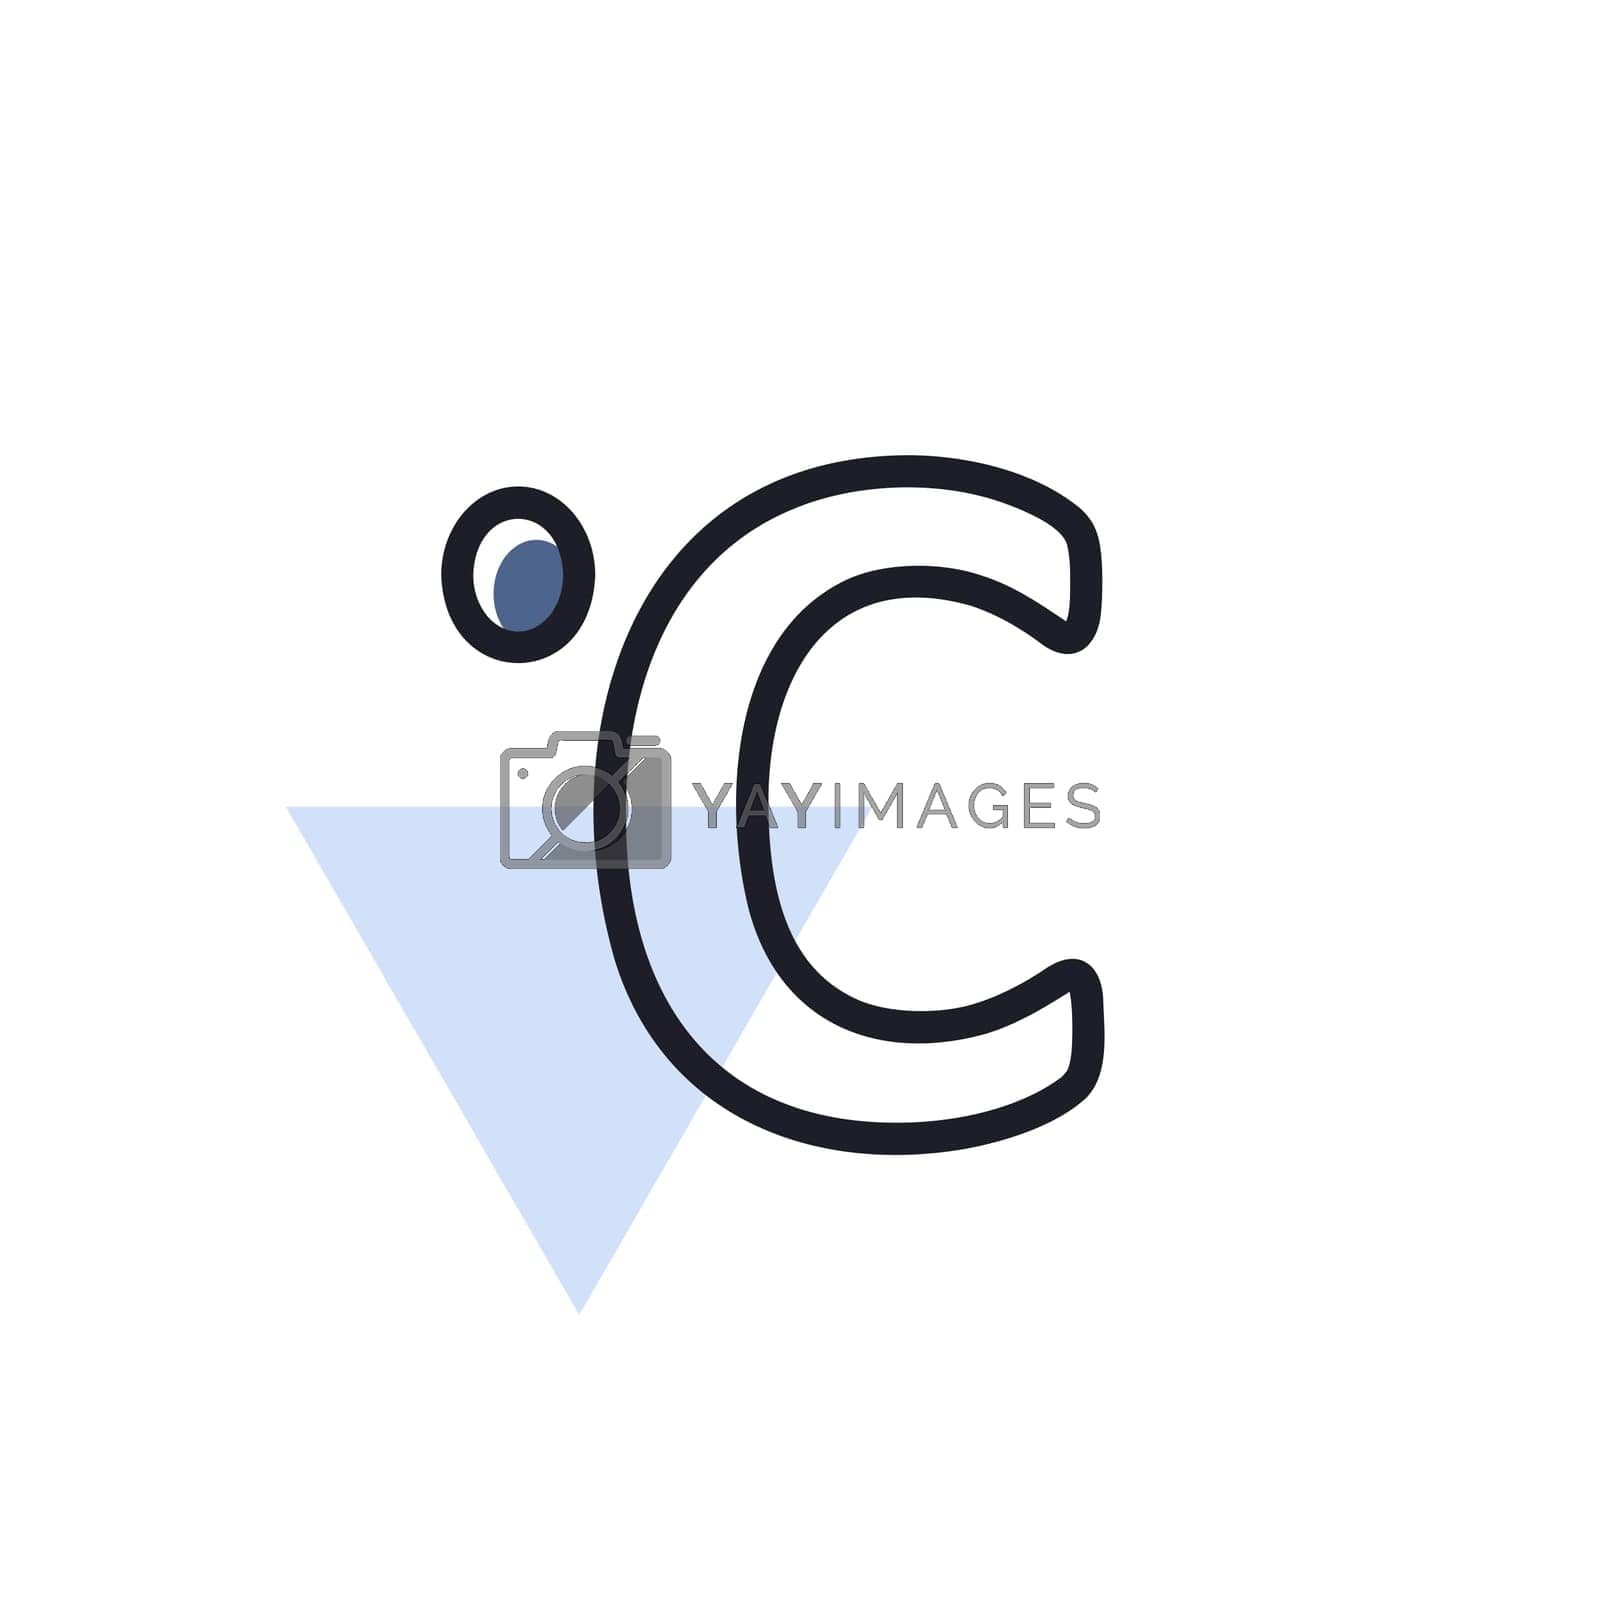 Celsius degrees vector icon. Meteorology sign. Graph symbol for travel, tourism and weather web site and apps design, logo, app, UI